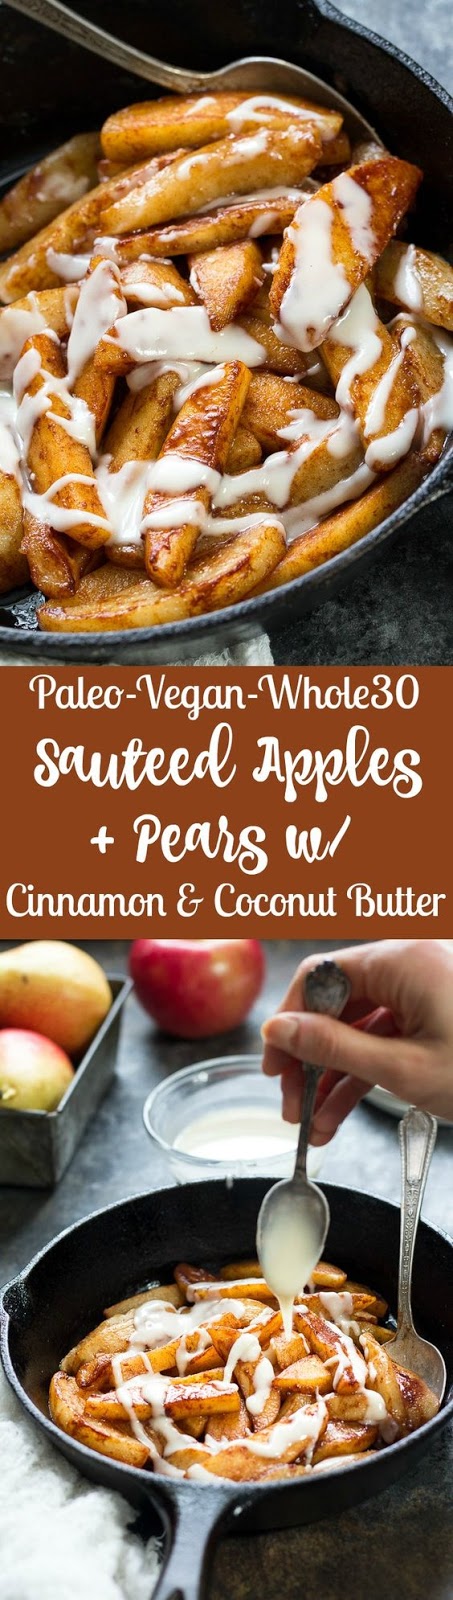 Incredibly easy and delicious Sautéed Apples & Pears with Cinnamon and Coconut Butter that's Paleo, Vegan, and Whole30 compliant. No added sugar or sweeteners, dairy free, gluten free.